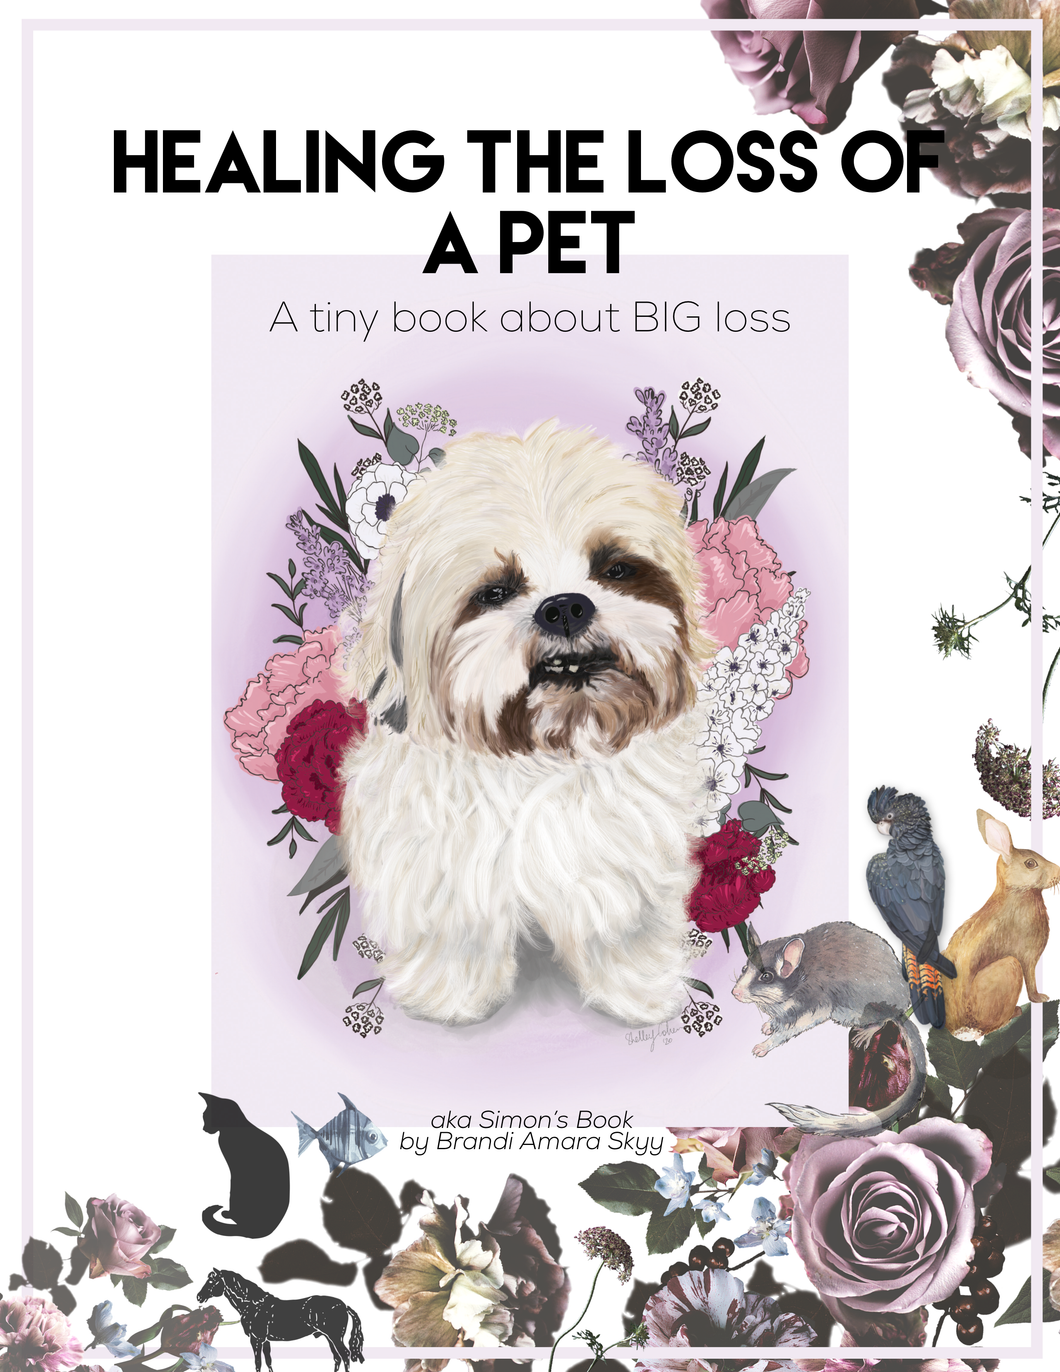 How To Heal The Loss Of A Pet